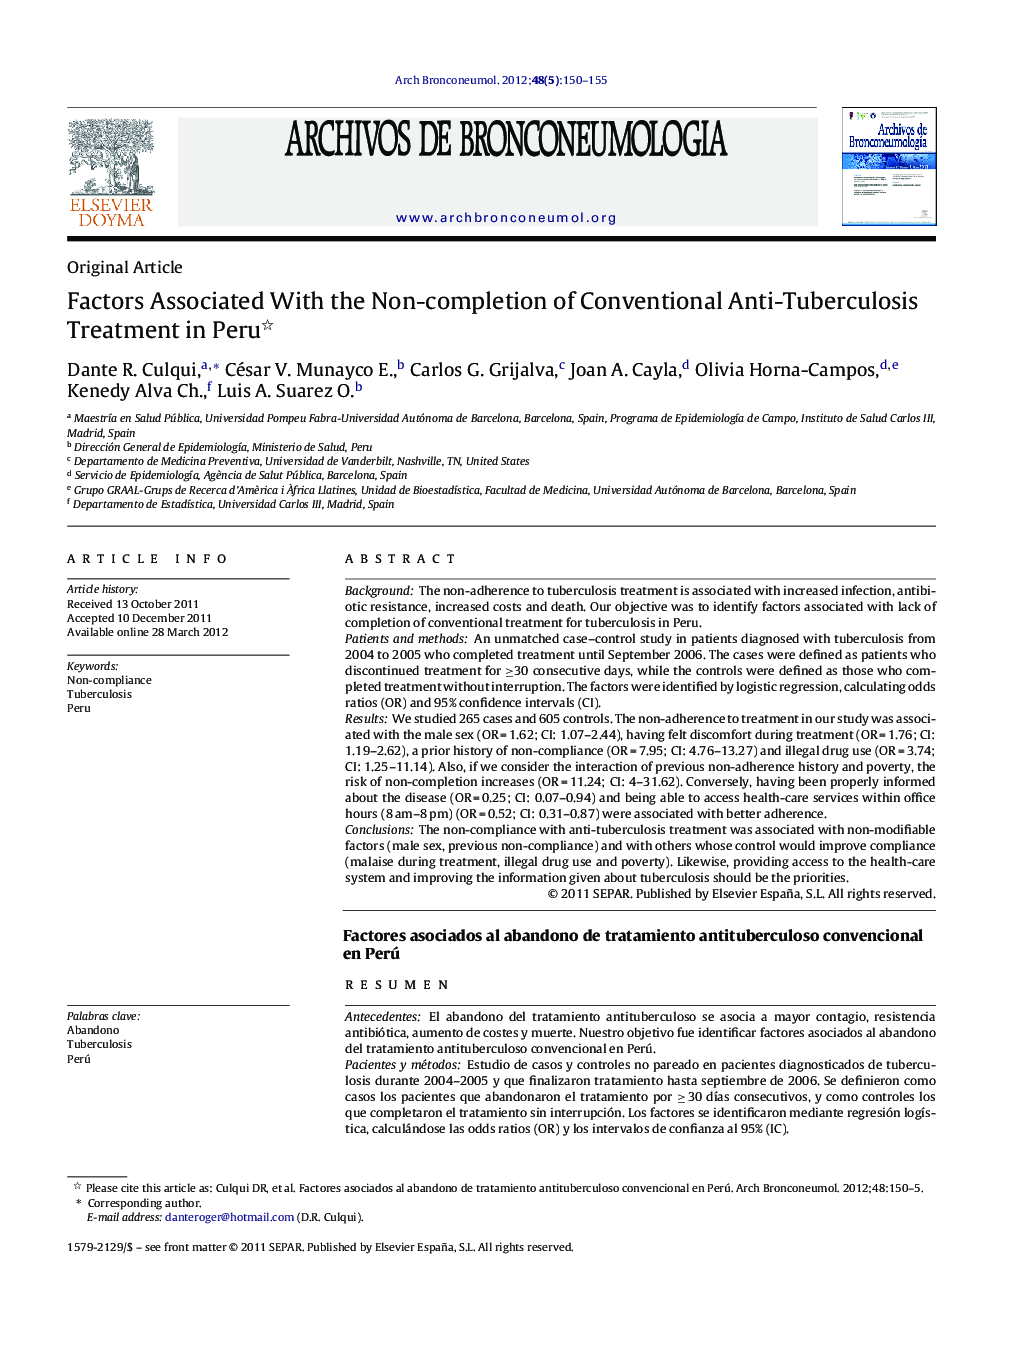 Factors Associated With the Non-completion of Conventional Anti-Tuberculosis Treatment in Peru 